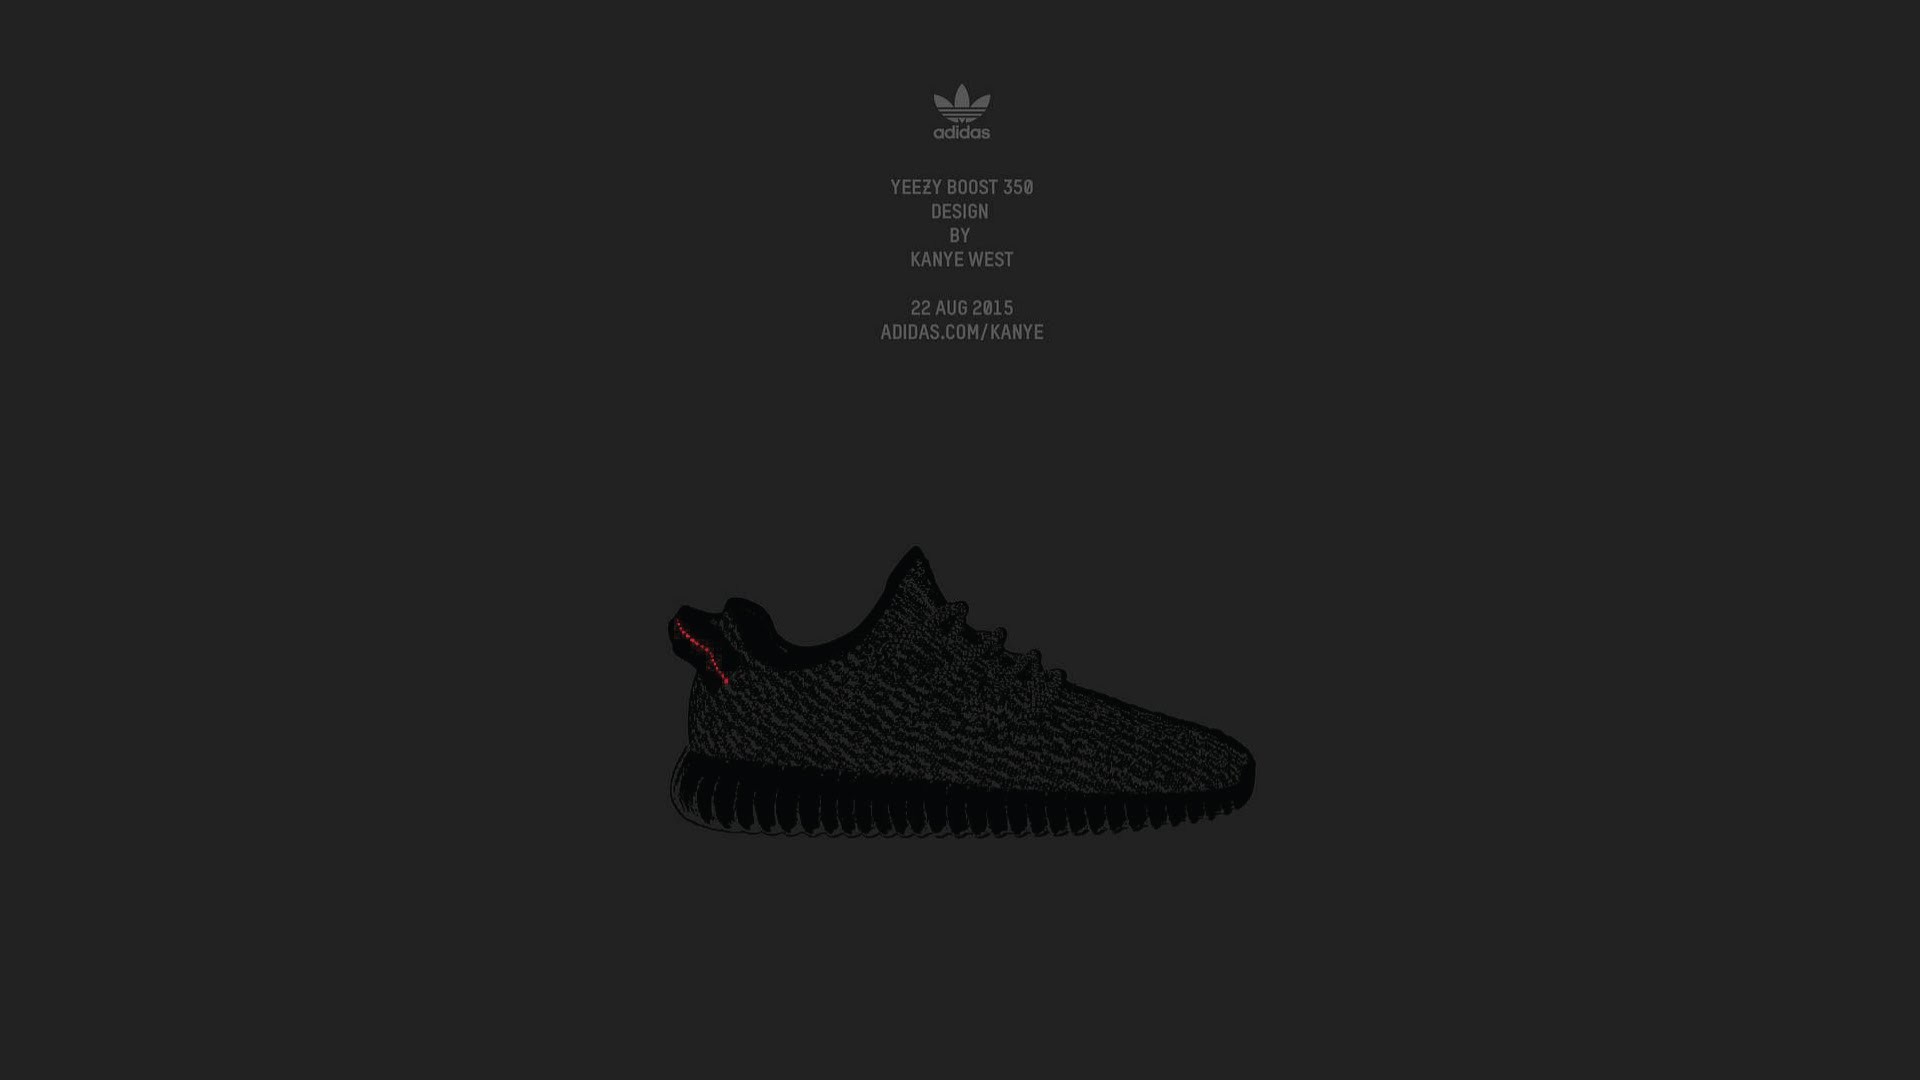 Yeezy Boost Photos Download The BEST Free Yeezy Boost Stock Photos  HD  Images